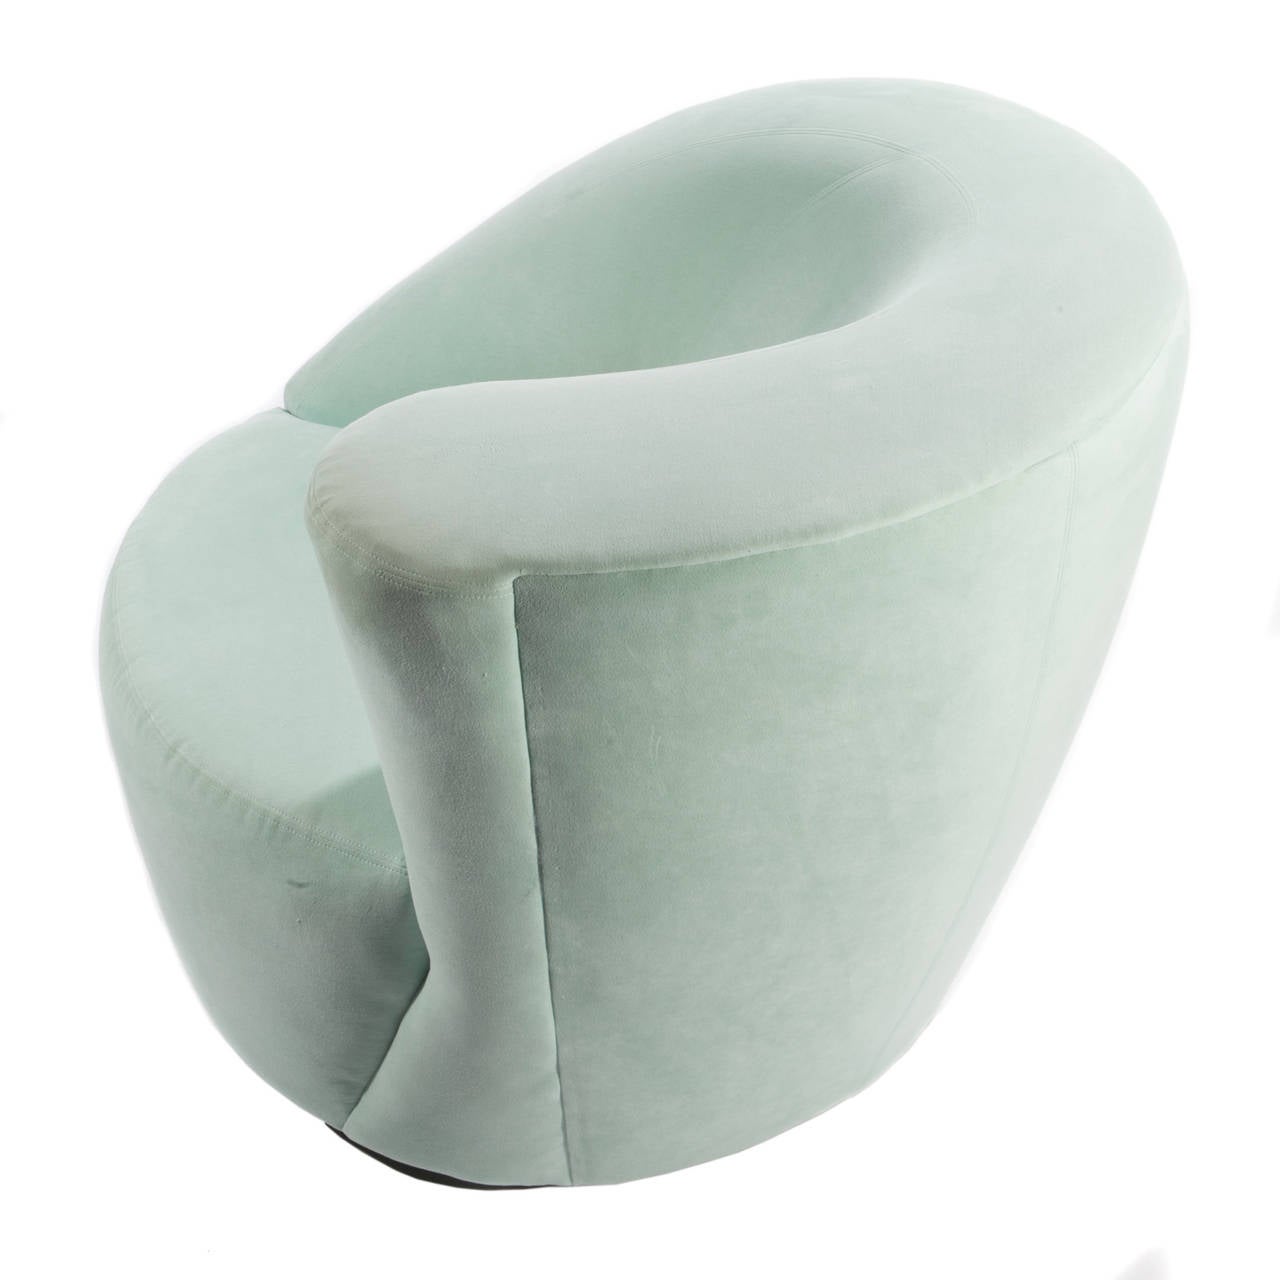 These beautiful, sculptural swivel chairs rotate and automatically return to their original positions. Original light-green microsuede upholstery with Directional tag on underside. These chairs are in our Brooklyn showroom.